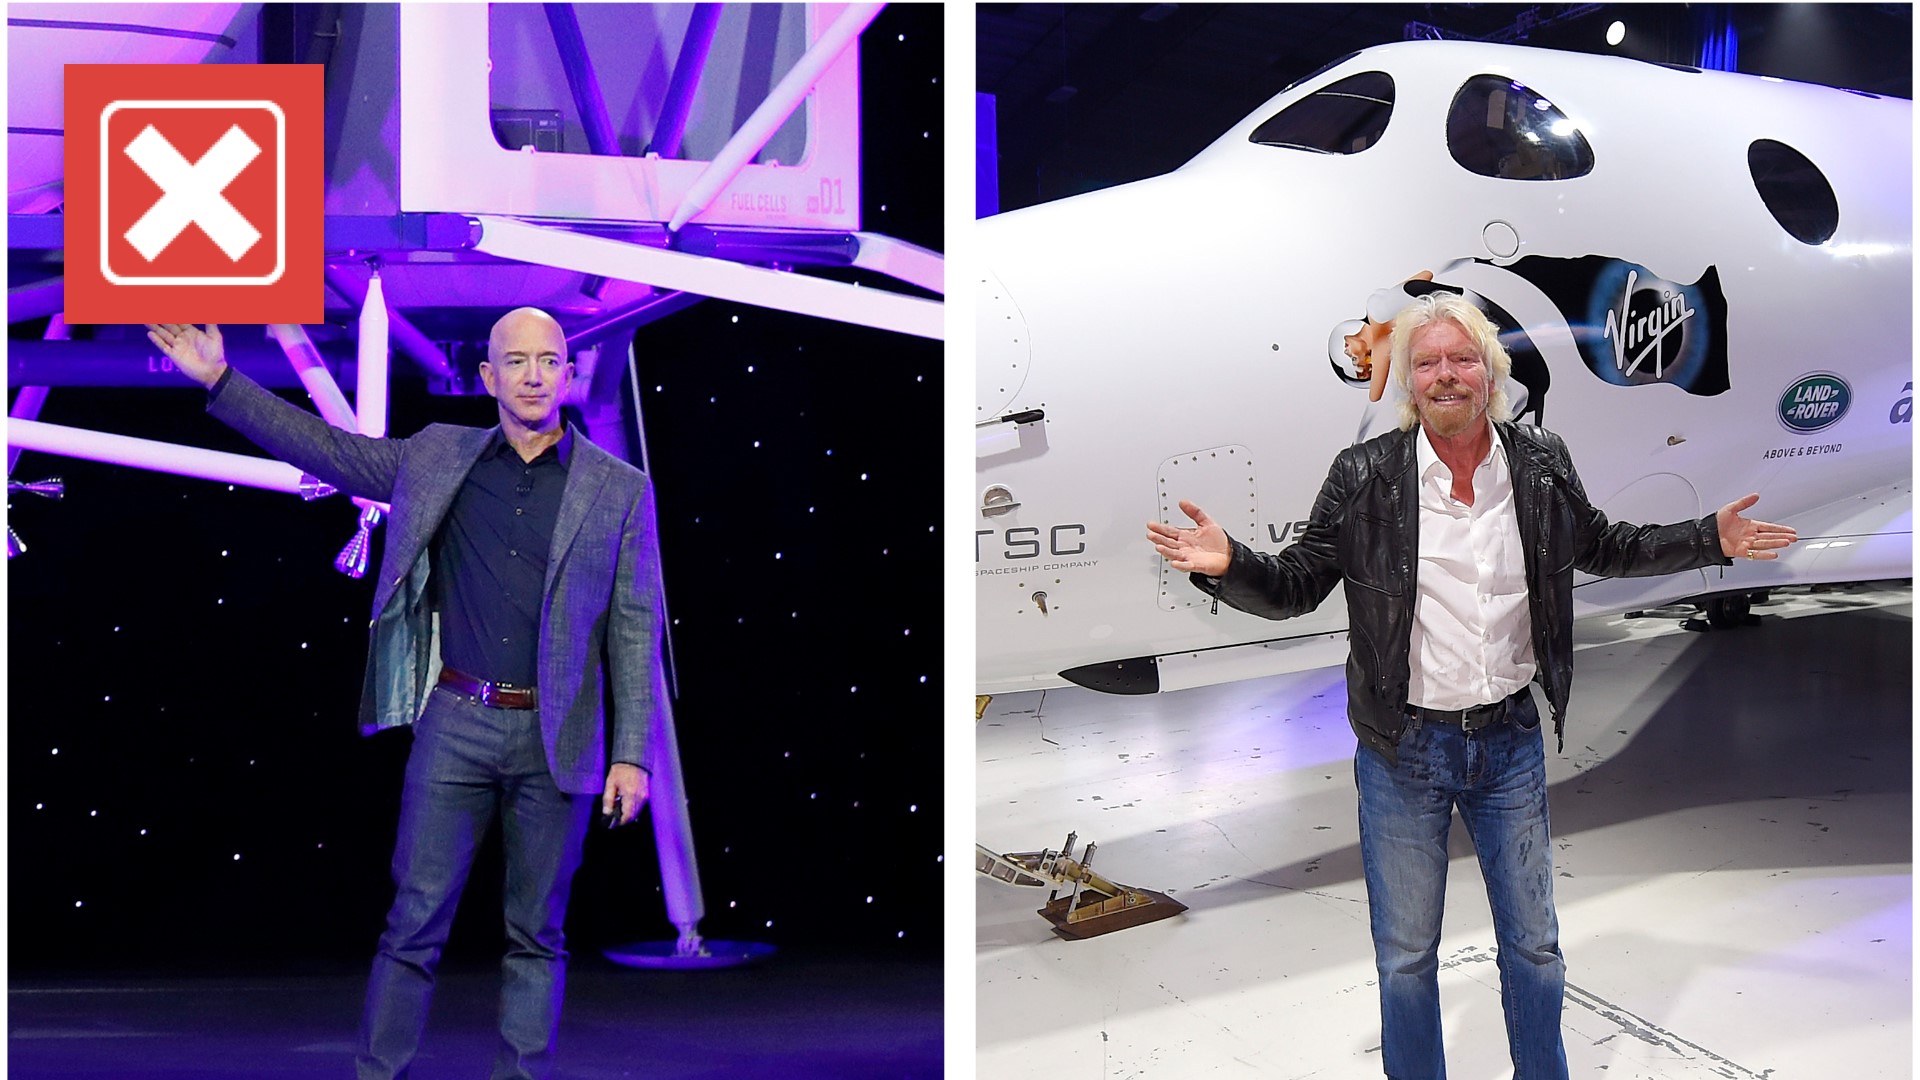 While experts say the flights by Branson and Bezos are ushering in a new era of space tourism, the billionaires are not the first space tourists.